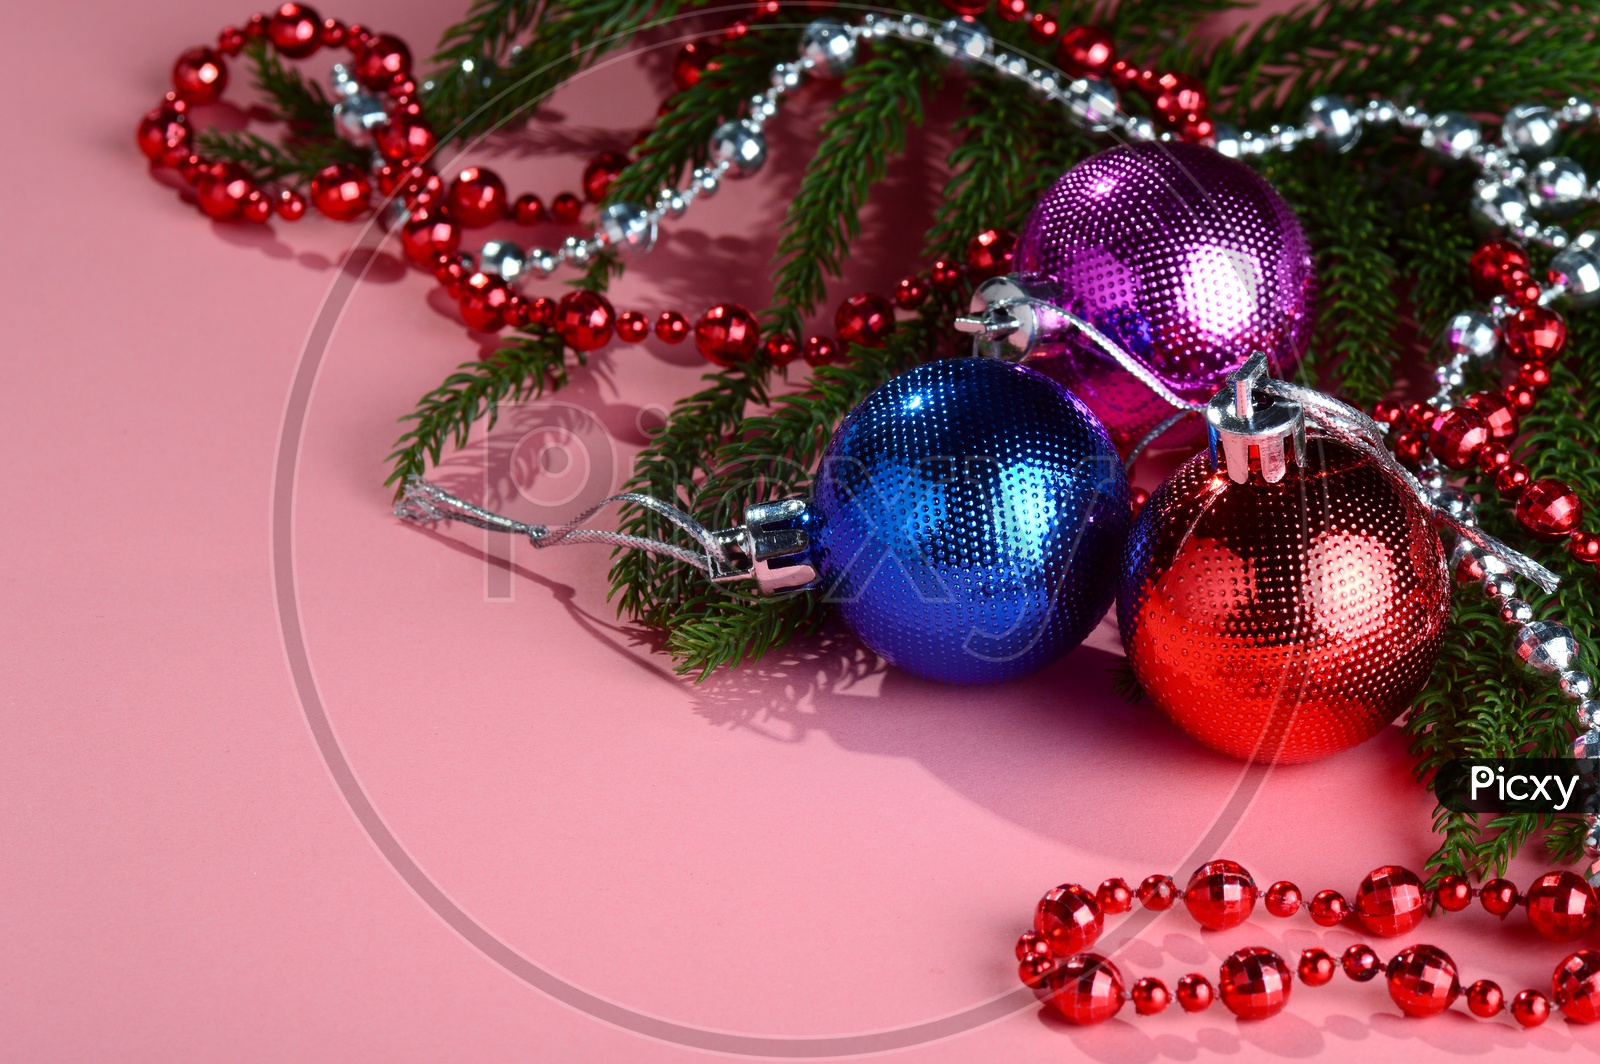 Christmas Greeting Template With Spacing And With Christmas Balls And Tree Decoration Background